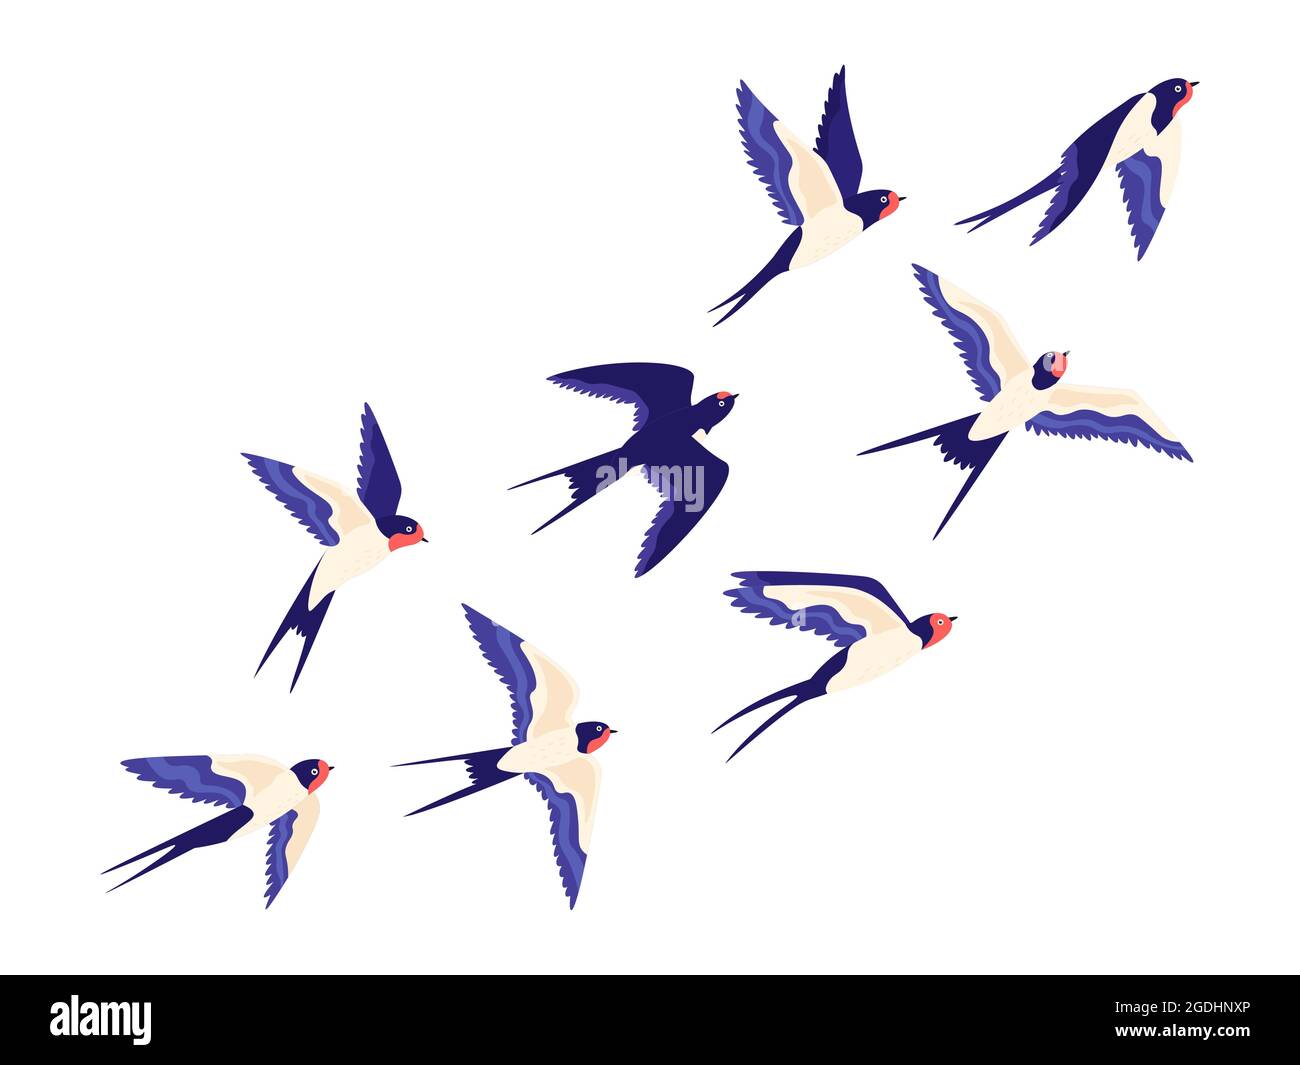 Flat small swallow bird flock flying in air. Cartoon group of barn swallows freedom flight in sky. Peaceful vector illustration with birds Stock Vector